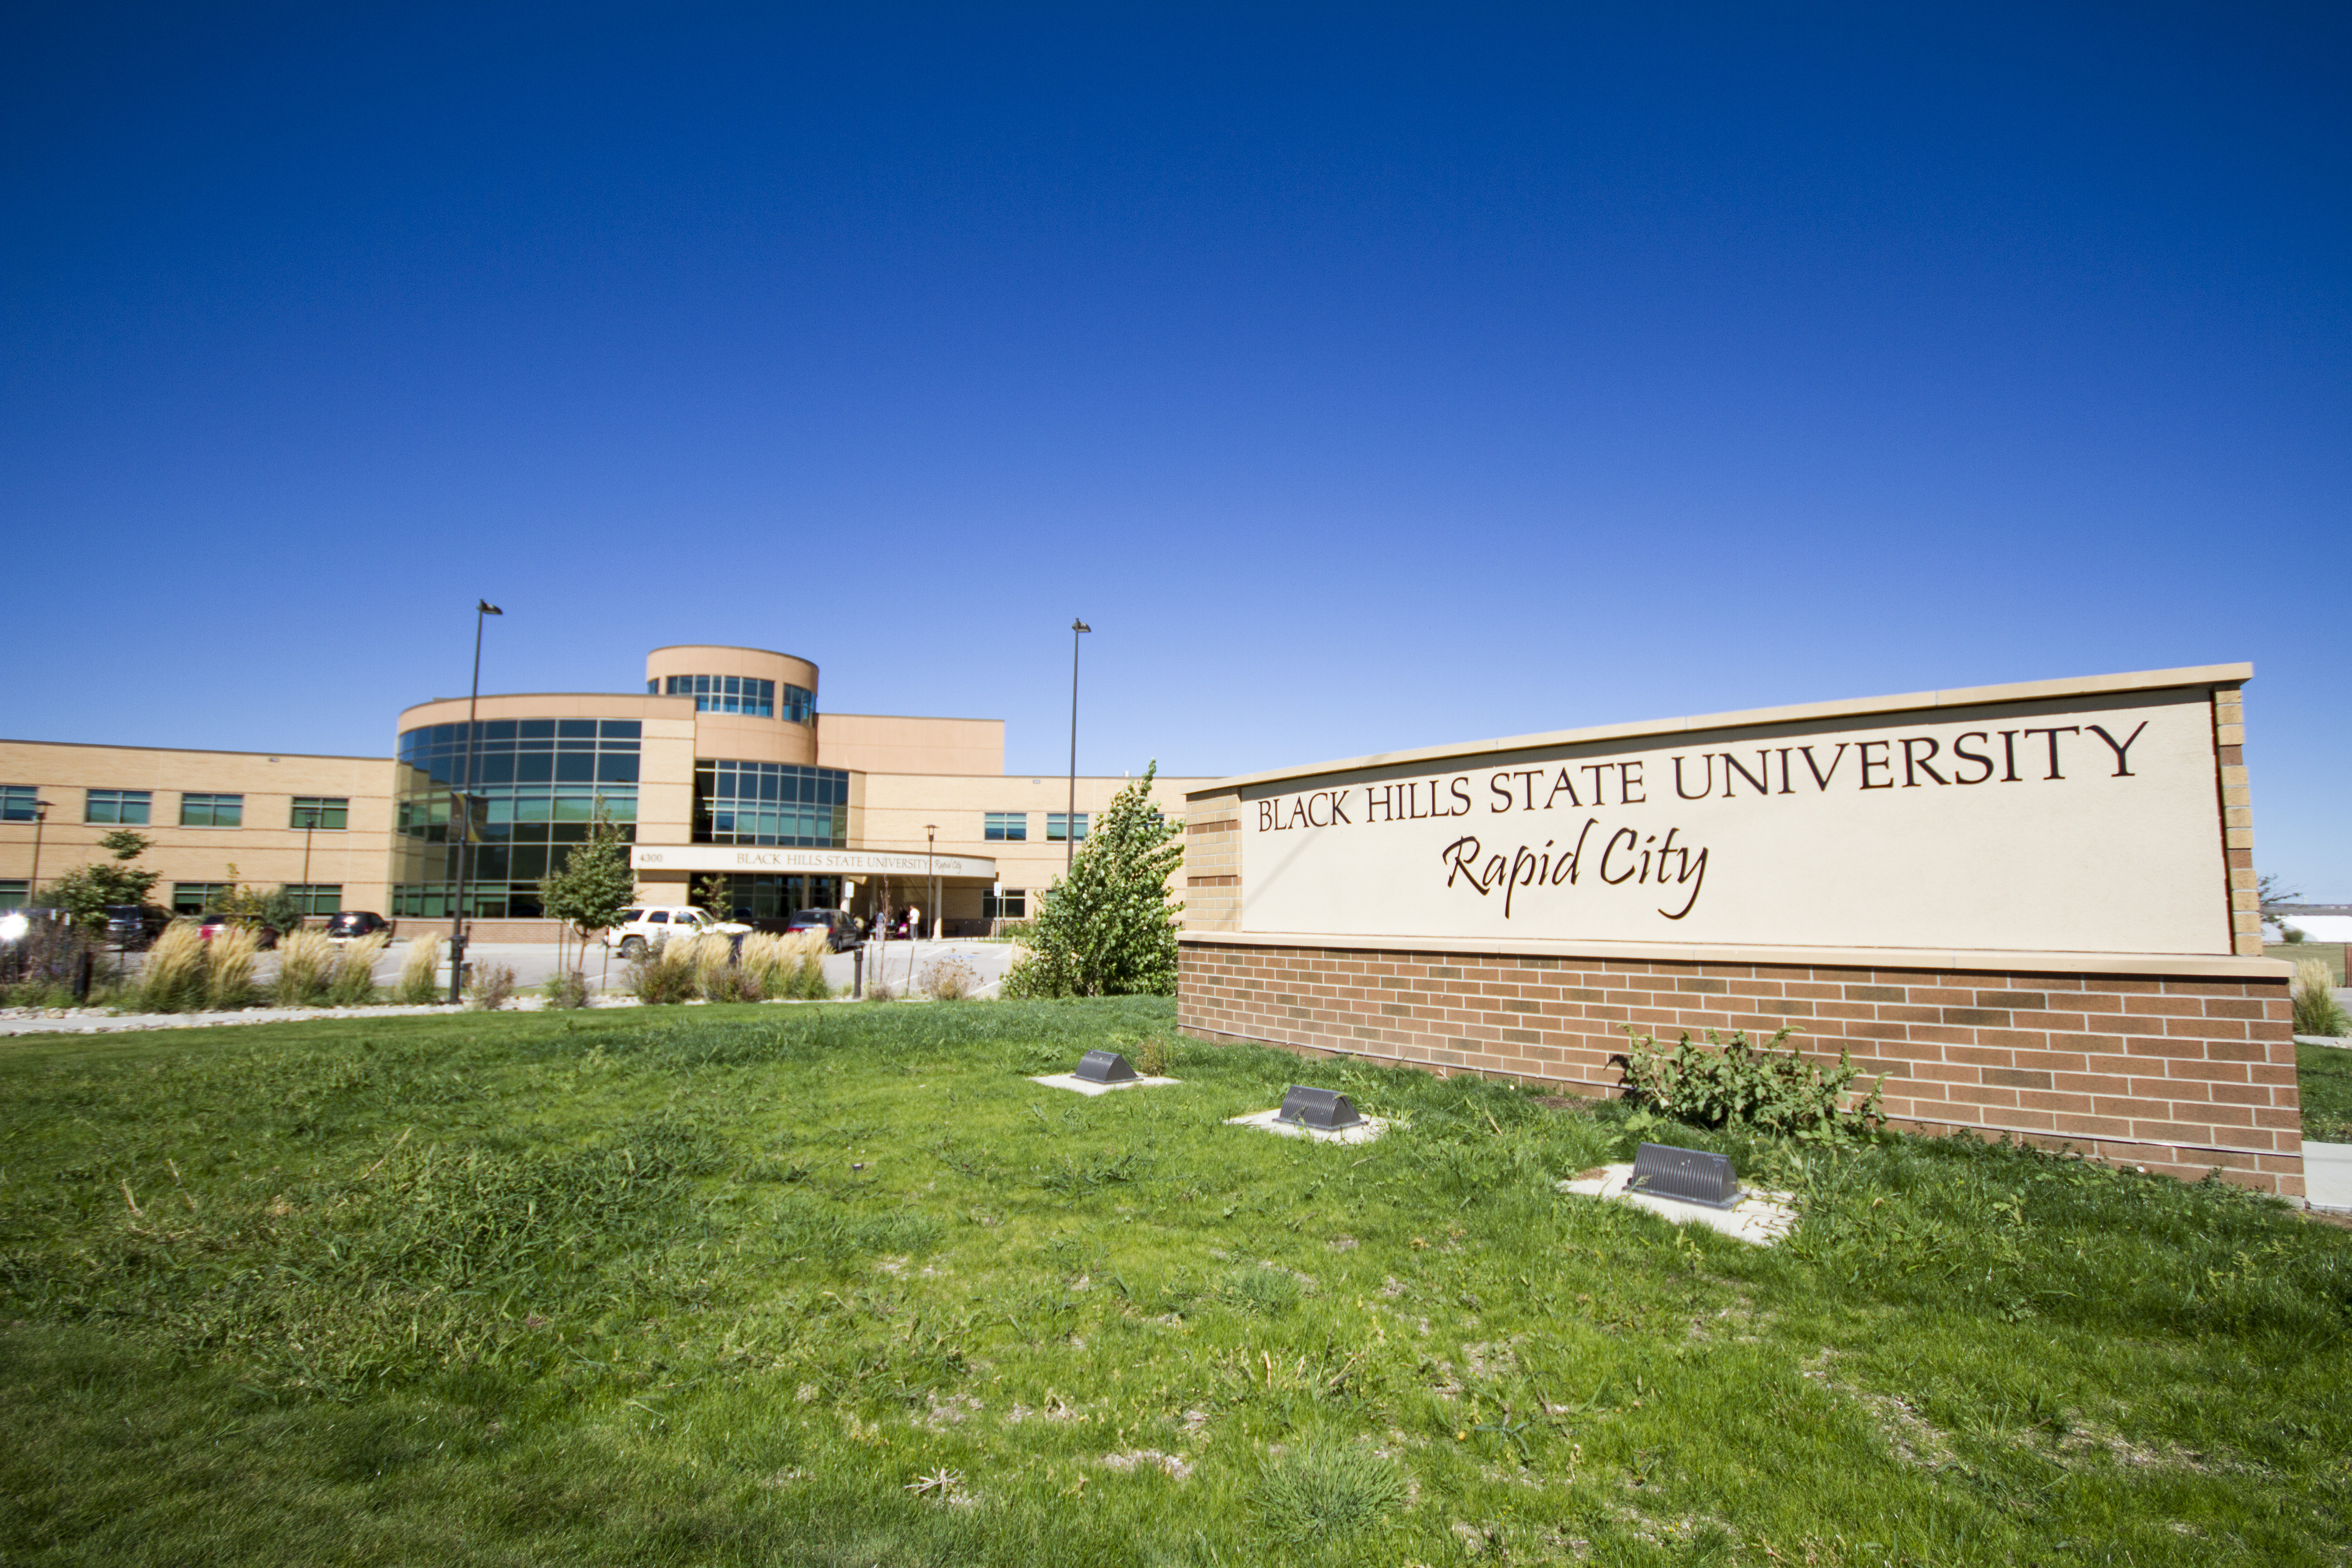 Exterior view of Black Hills State University-Rapid City campus featuring a modern building with large windows and a curved facade, set against a clear blue sky. In the foreground, a low brick wall displays the university's name in prominent lettering.